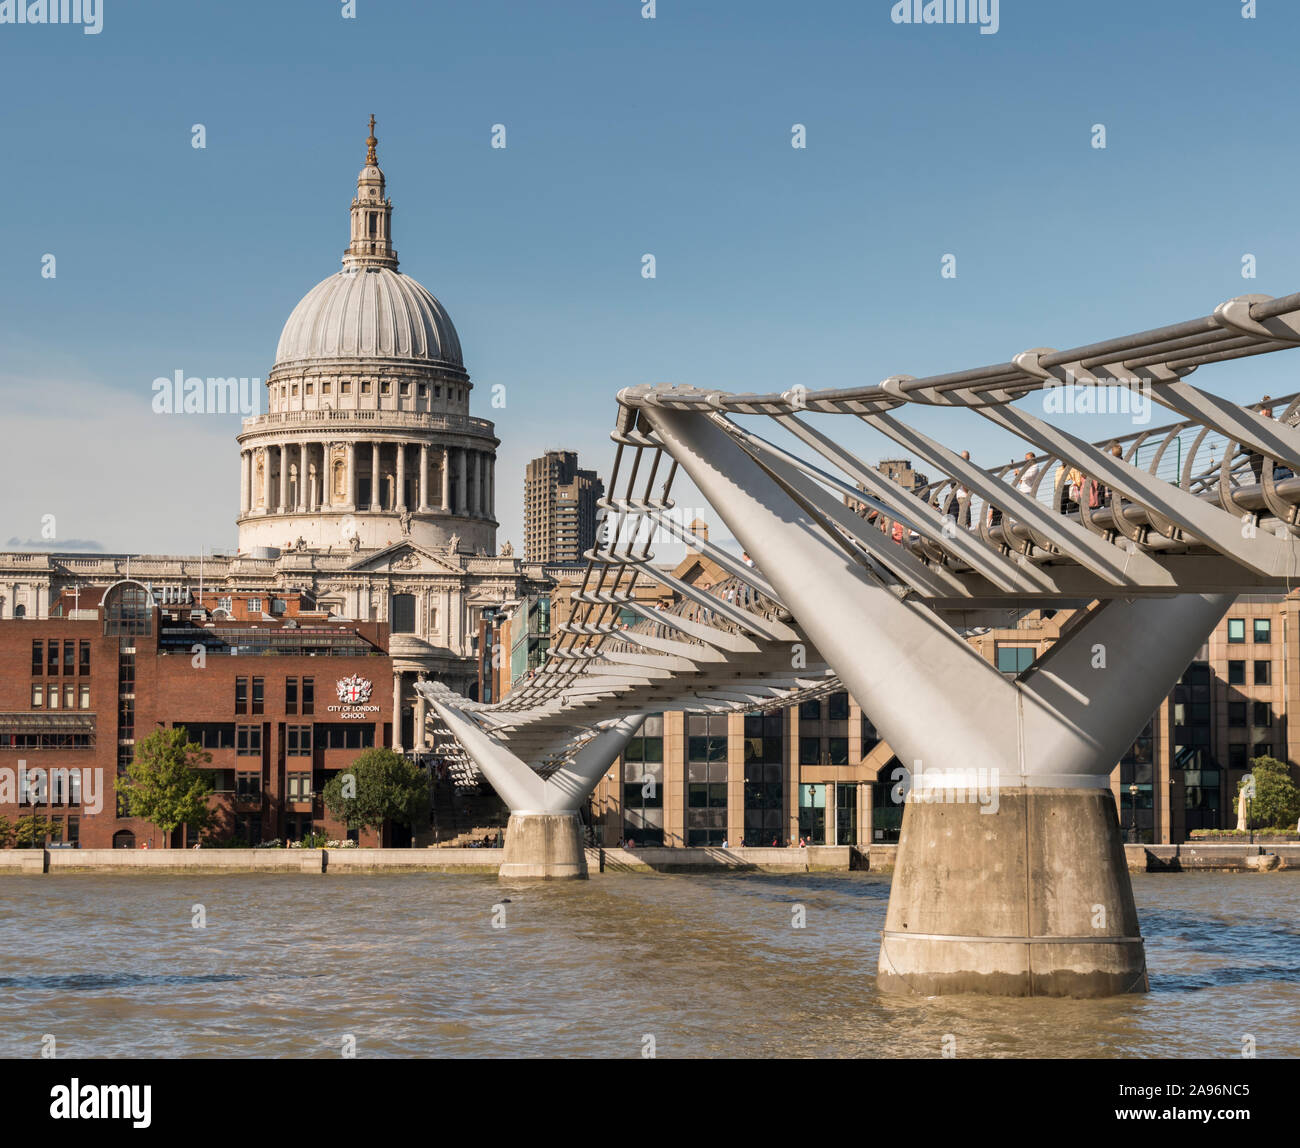 St Paul's Cathedral across the London Millennium Footbridge viewed from the Southbank. Stock Photo